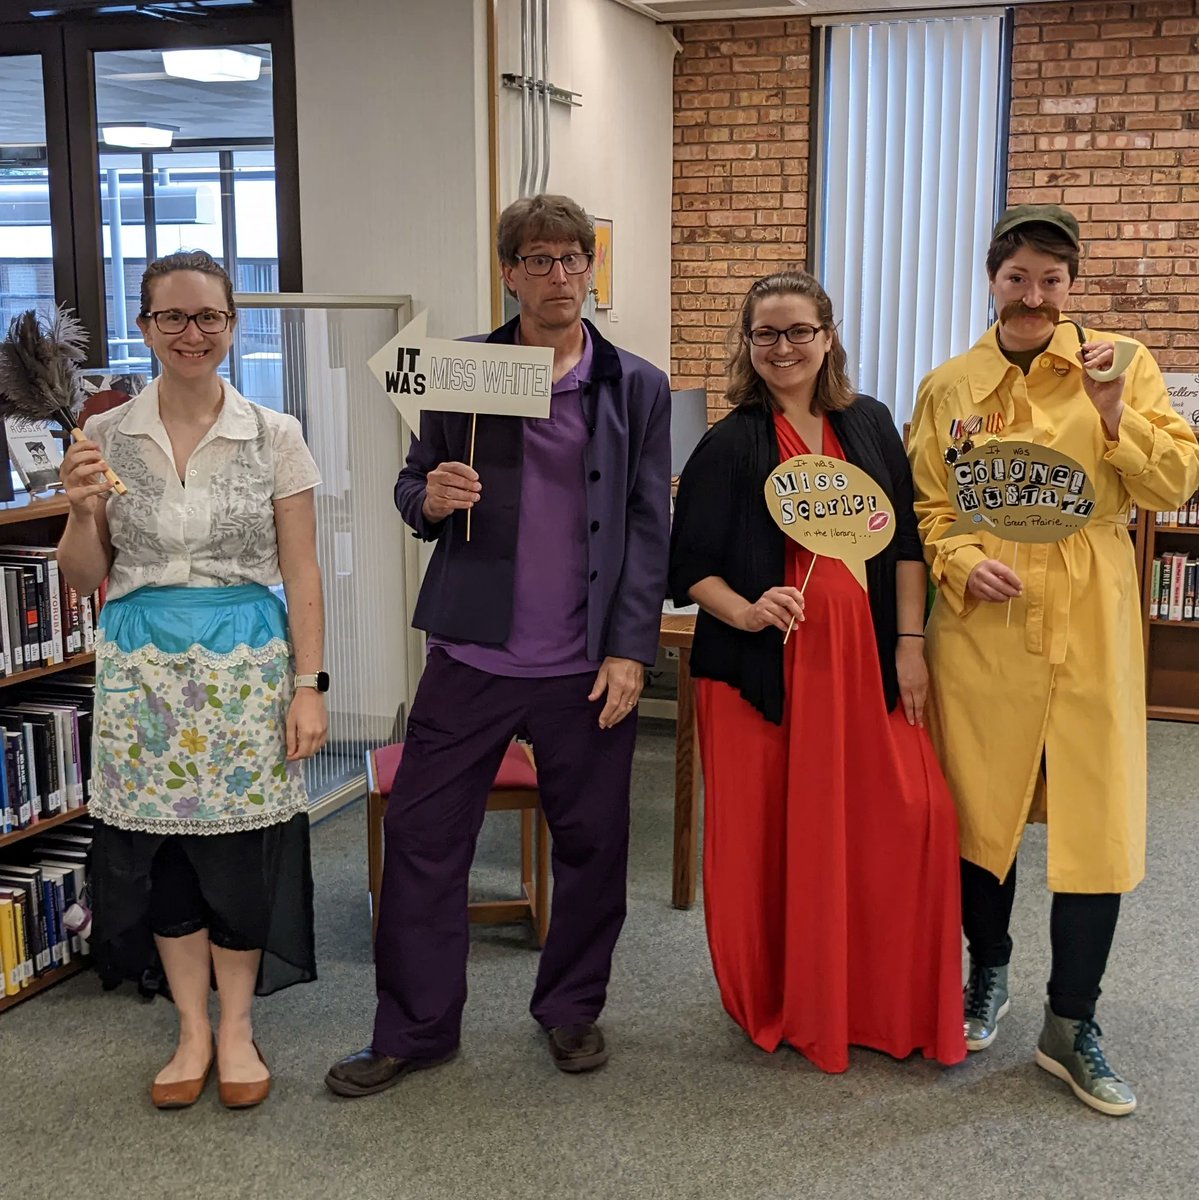 Had a blast during the Library escape room sessions for Welcome Week yesterday and can't wait to see how quickly this afternoon's students can escape the library! #welcomeweek2022 #umnmorris #escaperooms #clue